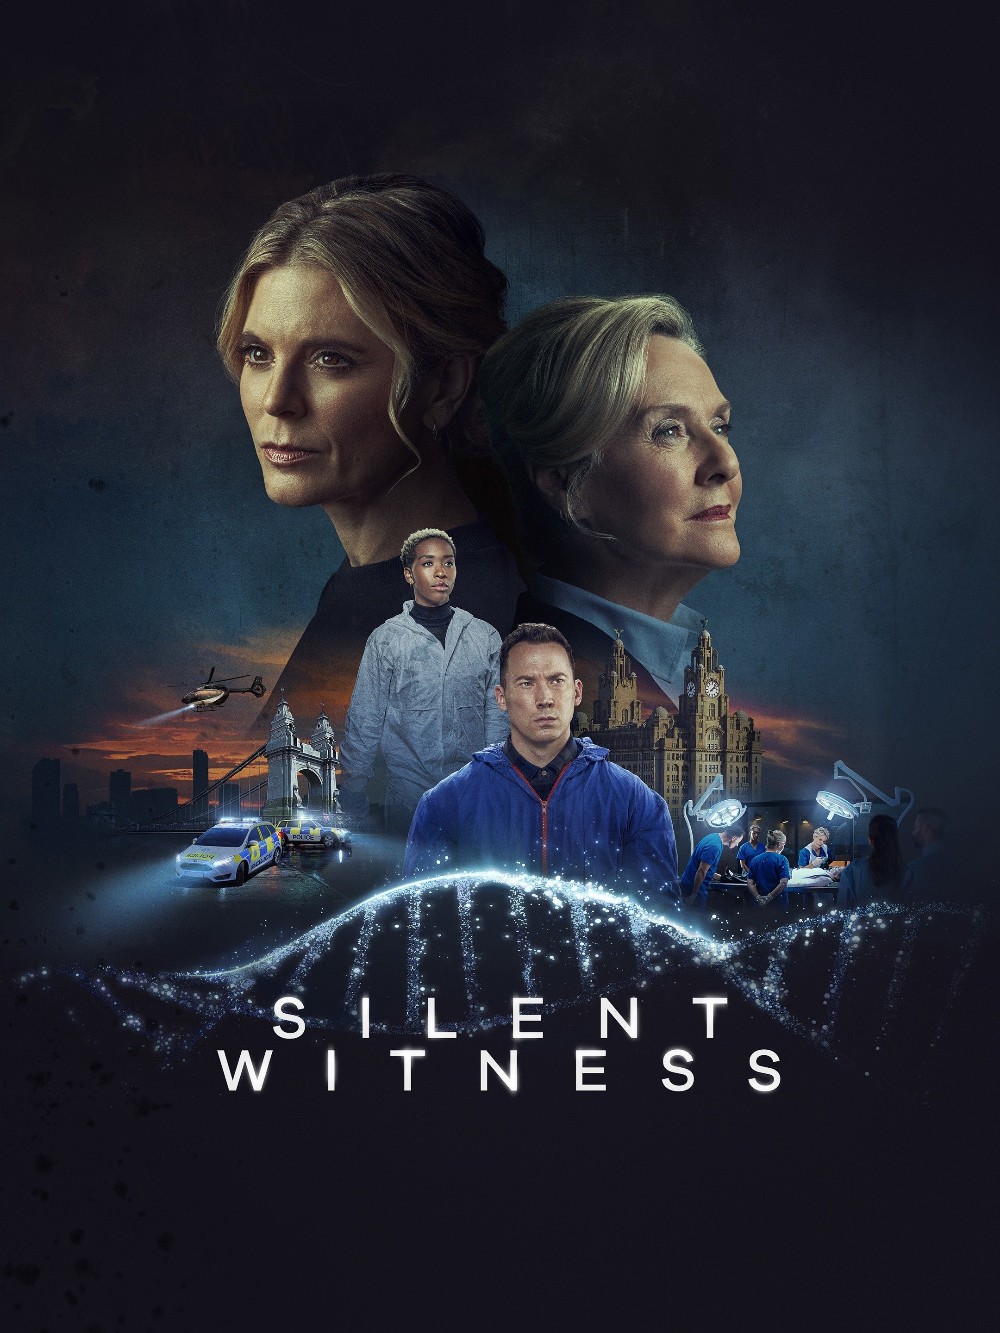 Silent Witness S27E04 Grievance Culture Part Two [720p] (x265) [6 CH] Bae0670096ddb3784f878b5807bba289